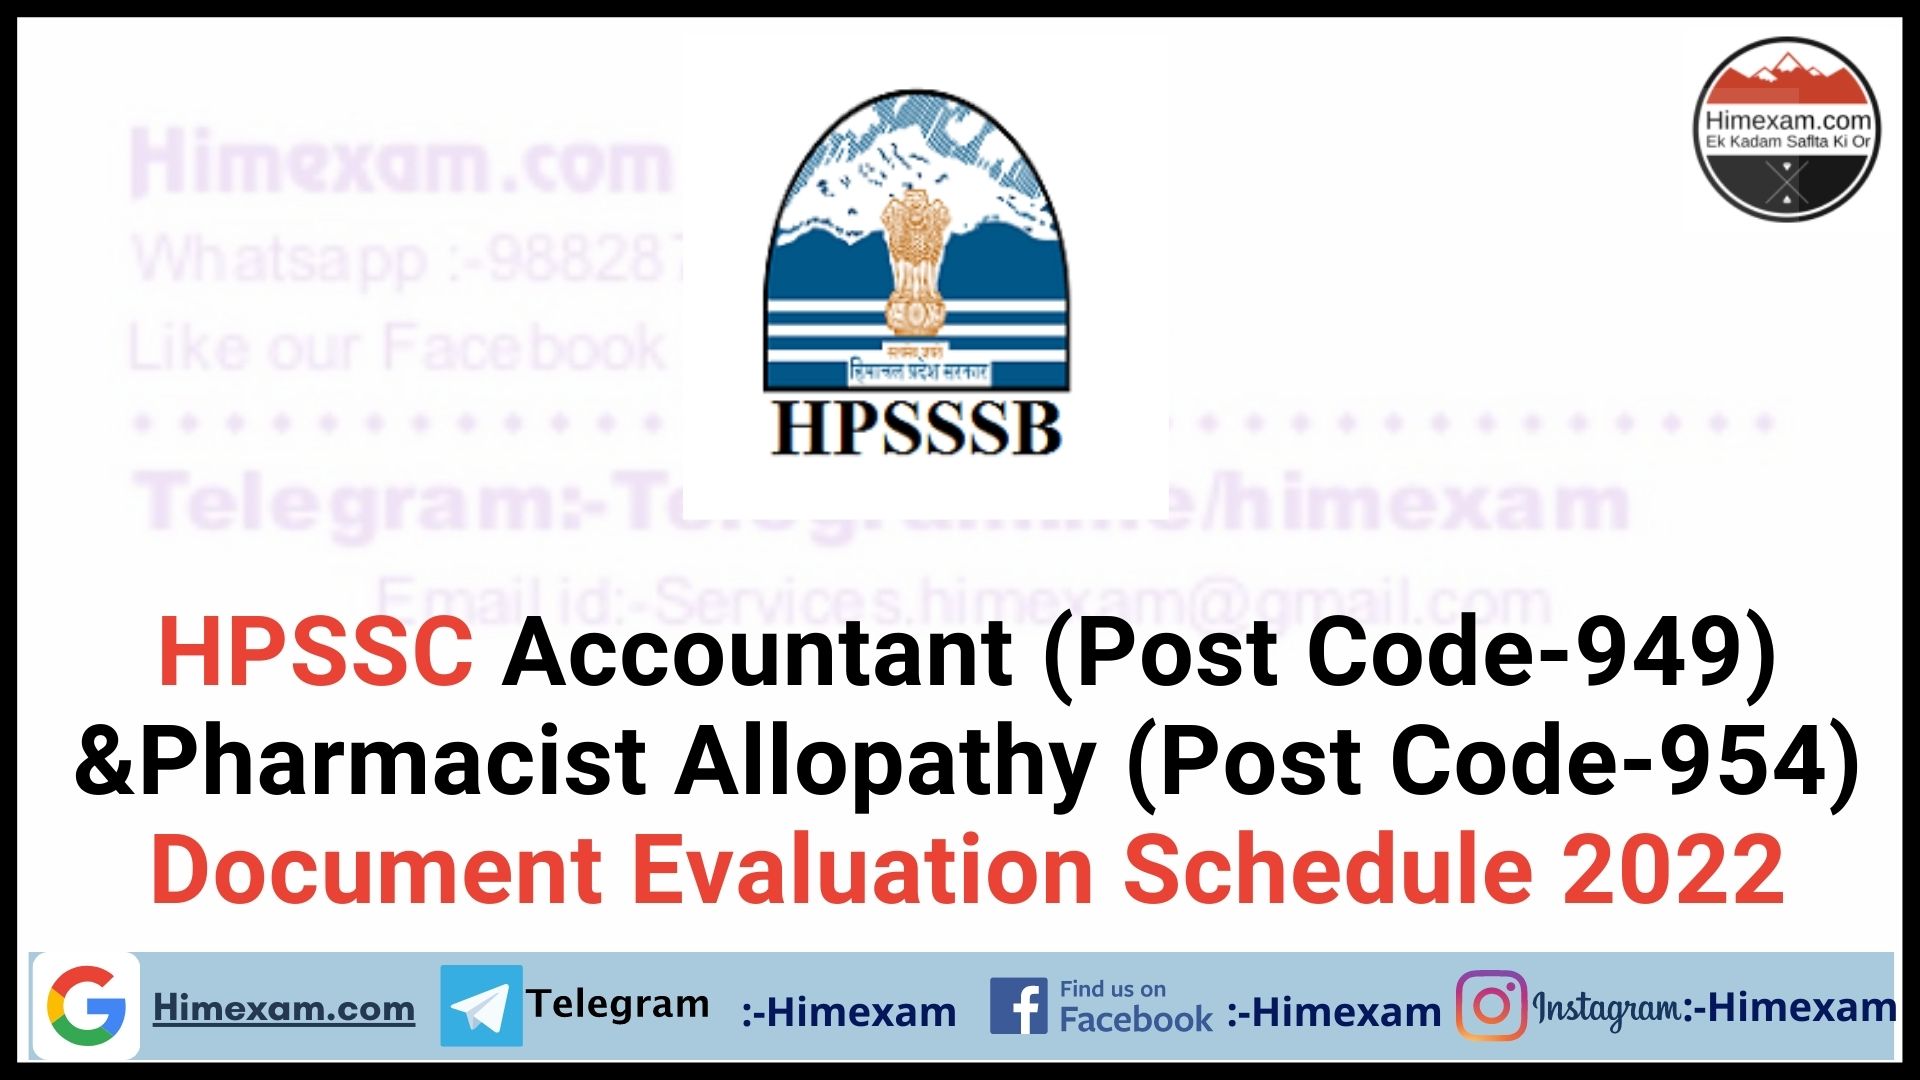 HPSSC Accountant (Post Code-949) &Pharmacist Allopathy (Post Code-954) Document Evaluation Schedule 2022